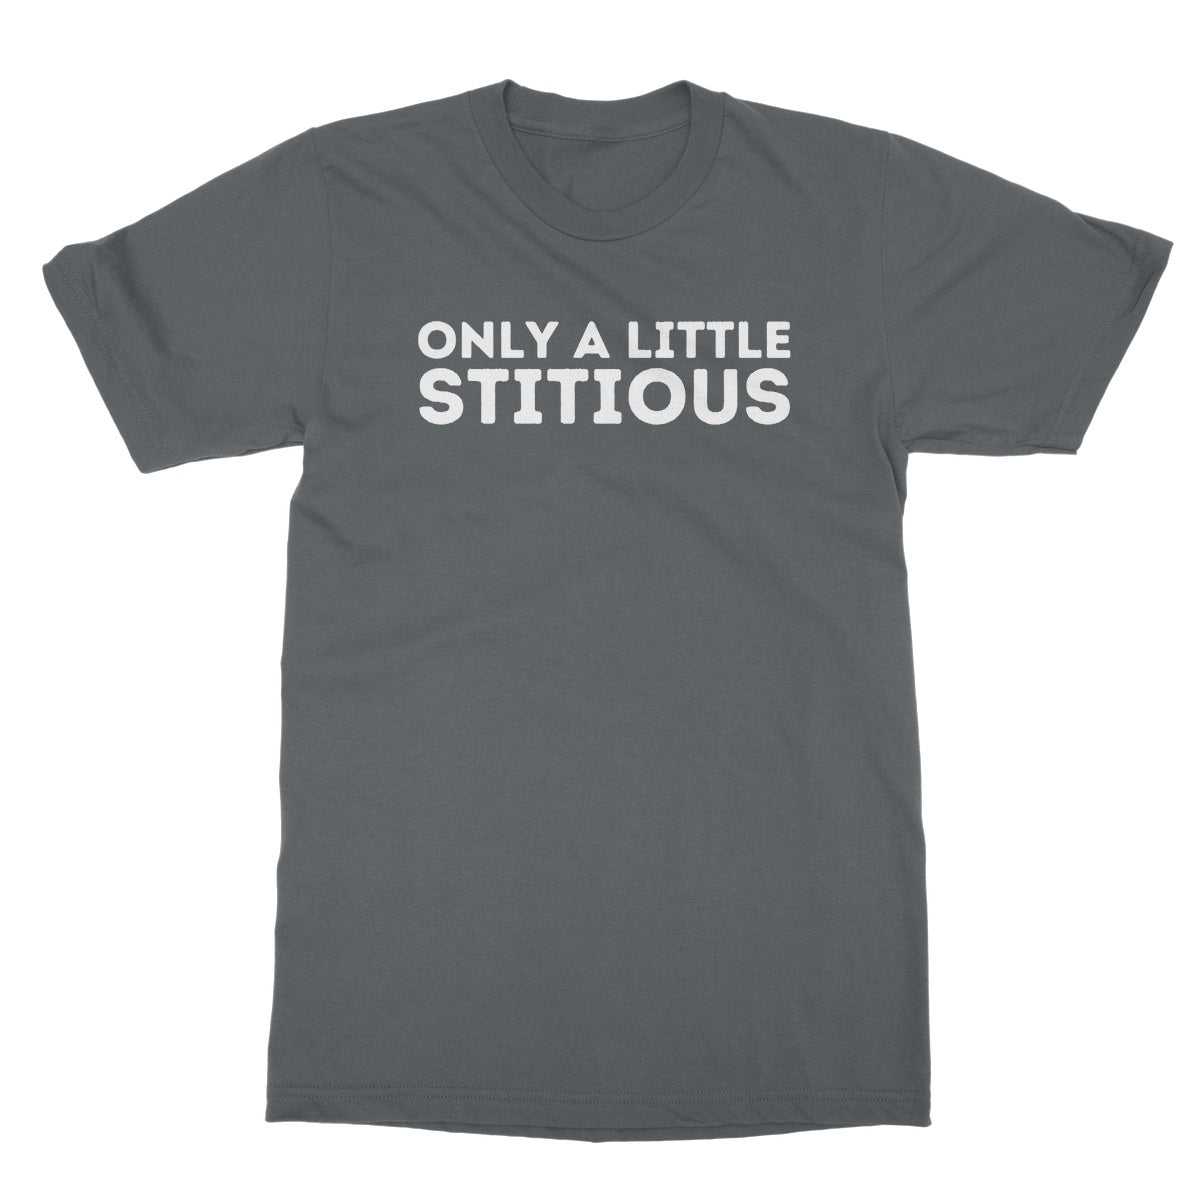 only a little stitious t shirt grey